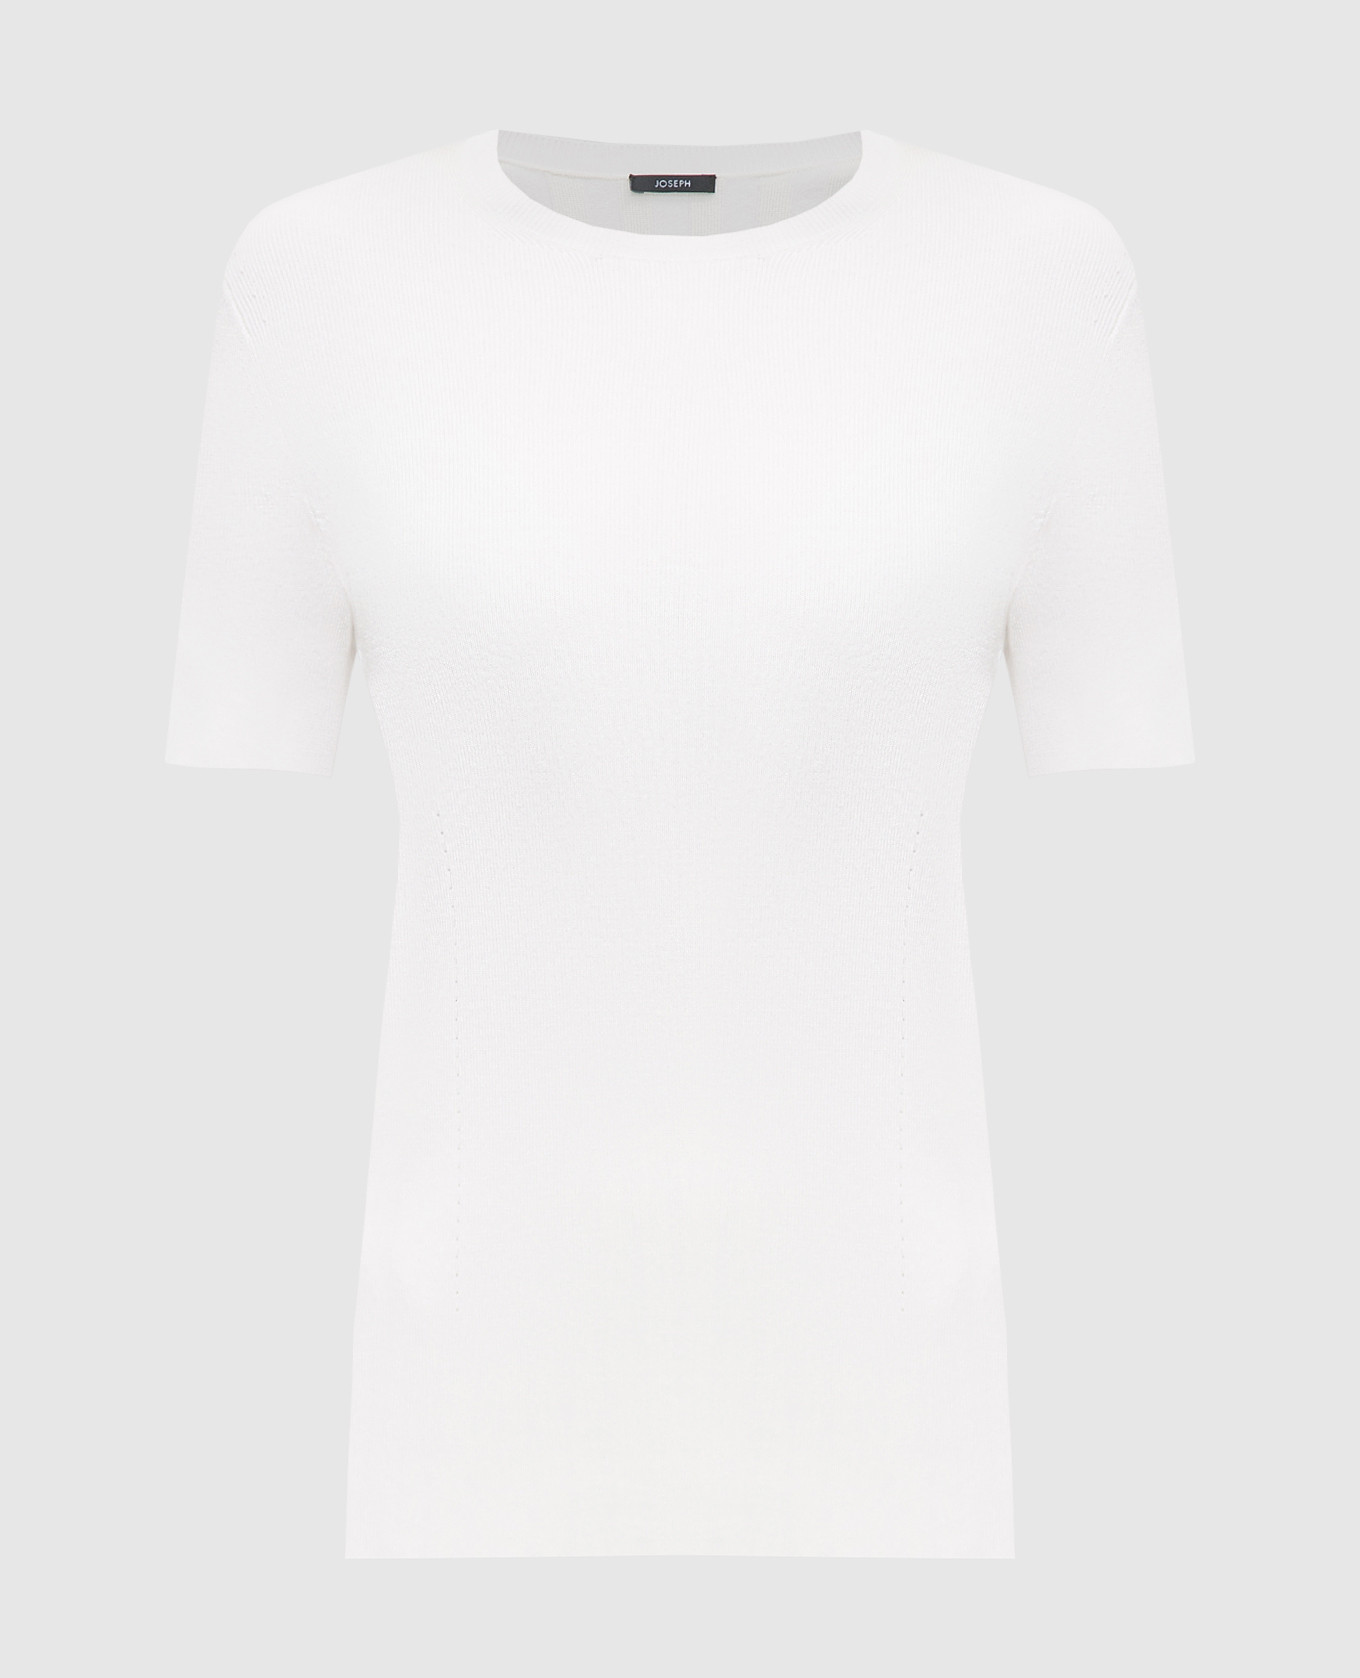 White t-shirt with a scar